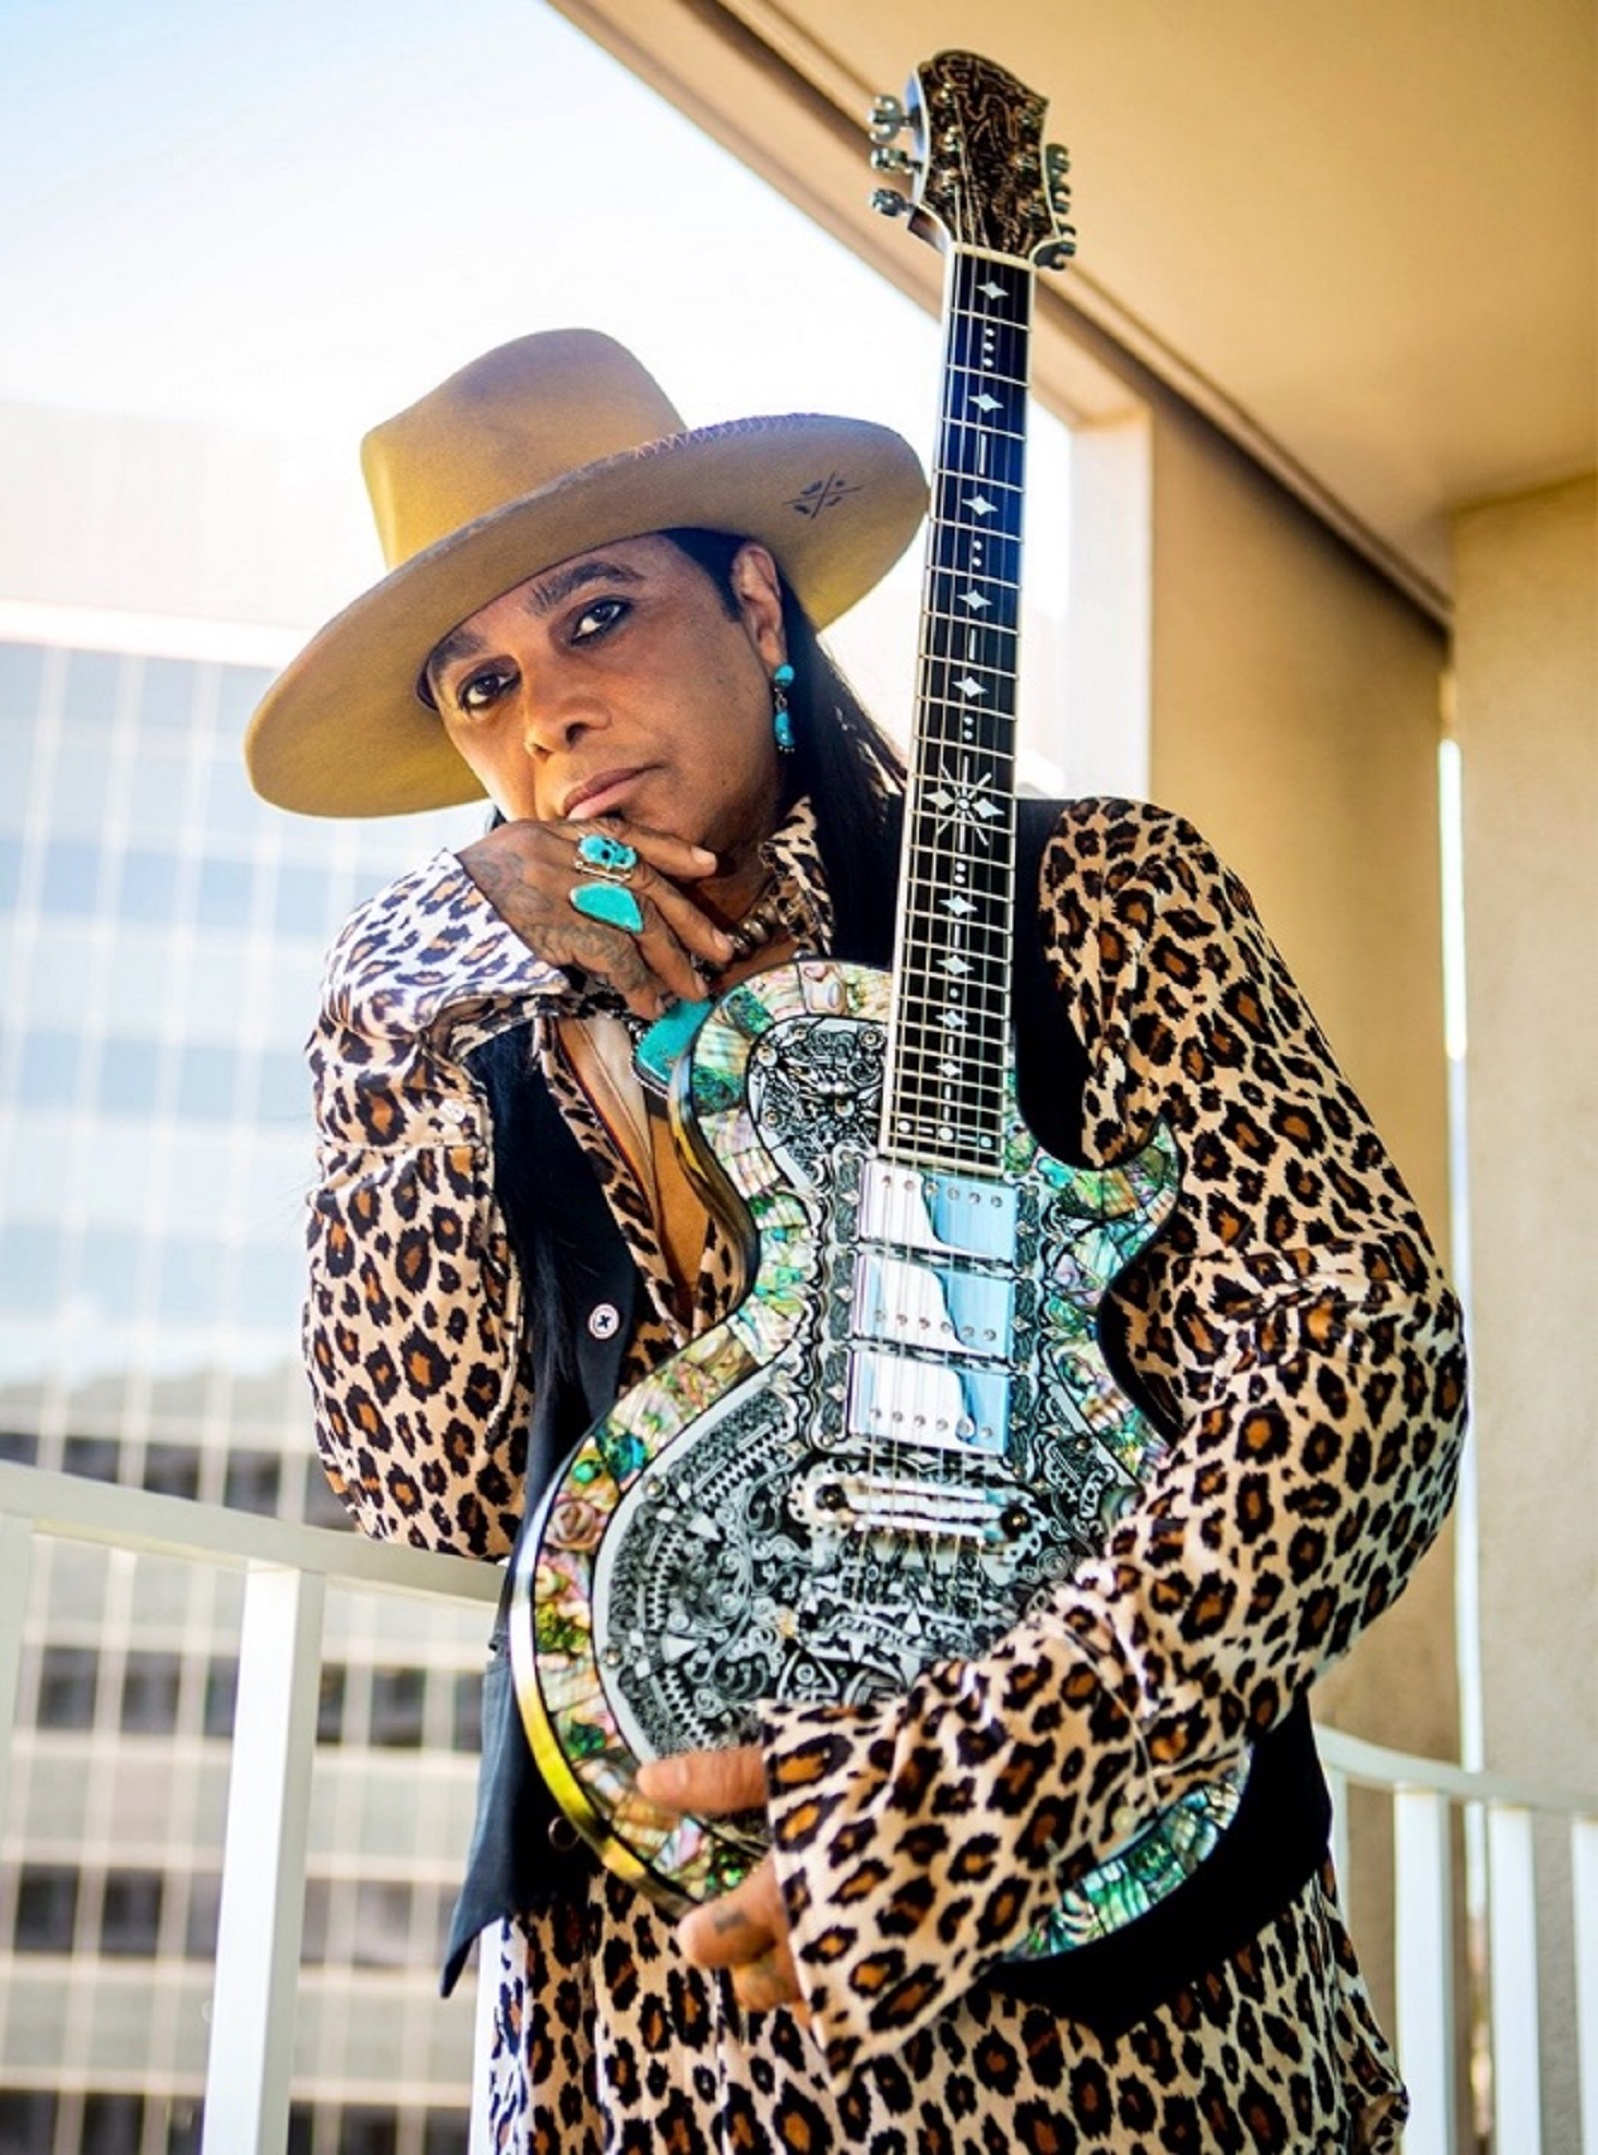 MICKI FREE REVEALS PEACE-DEVOTED NEW SINGLE “WE ARE ONE”